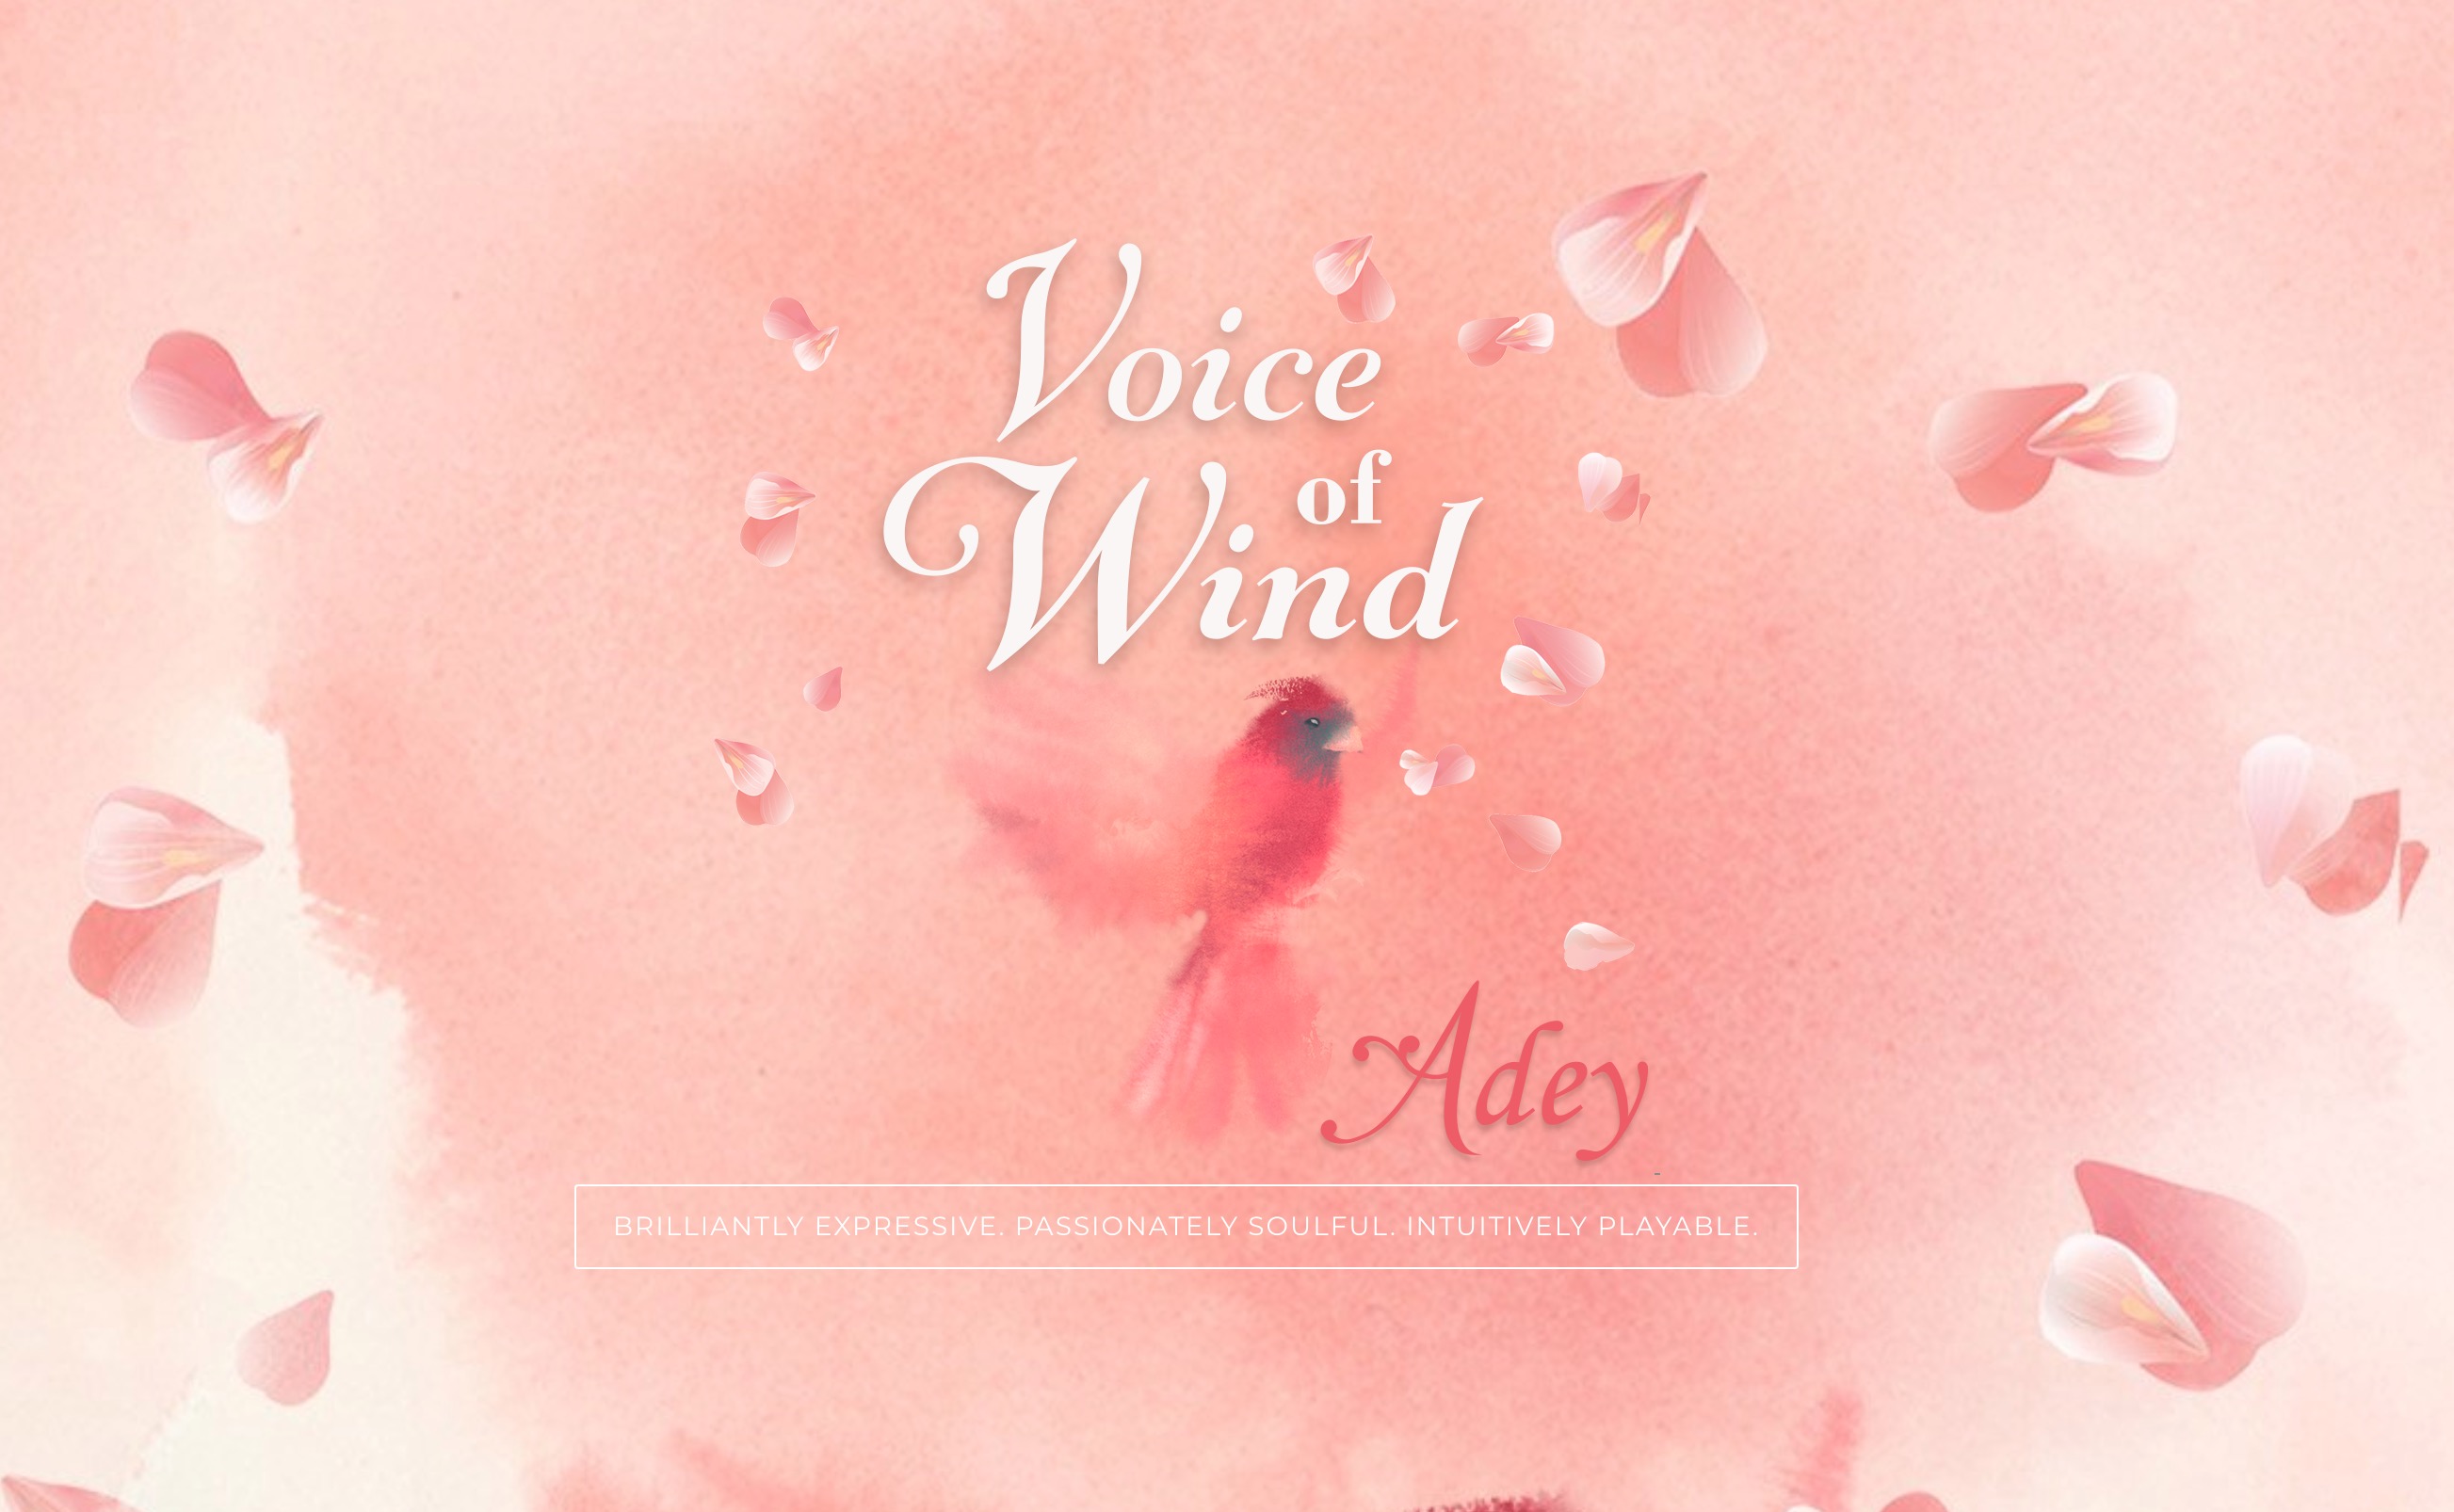 VOICE OF WIND ADEY Featured